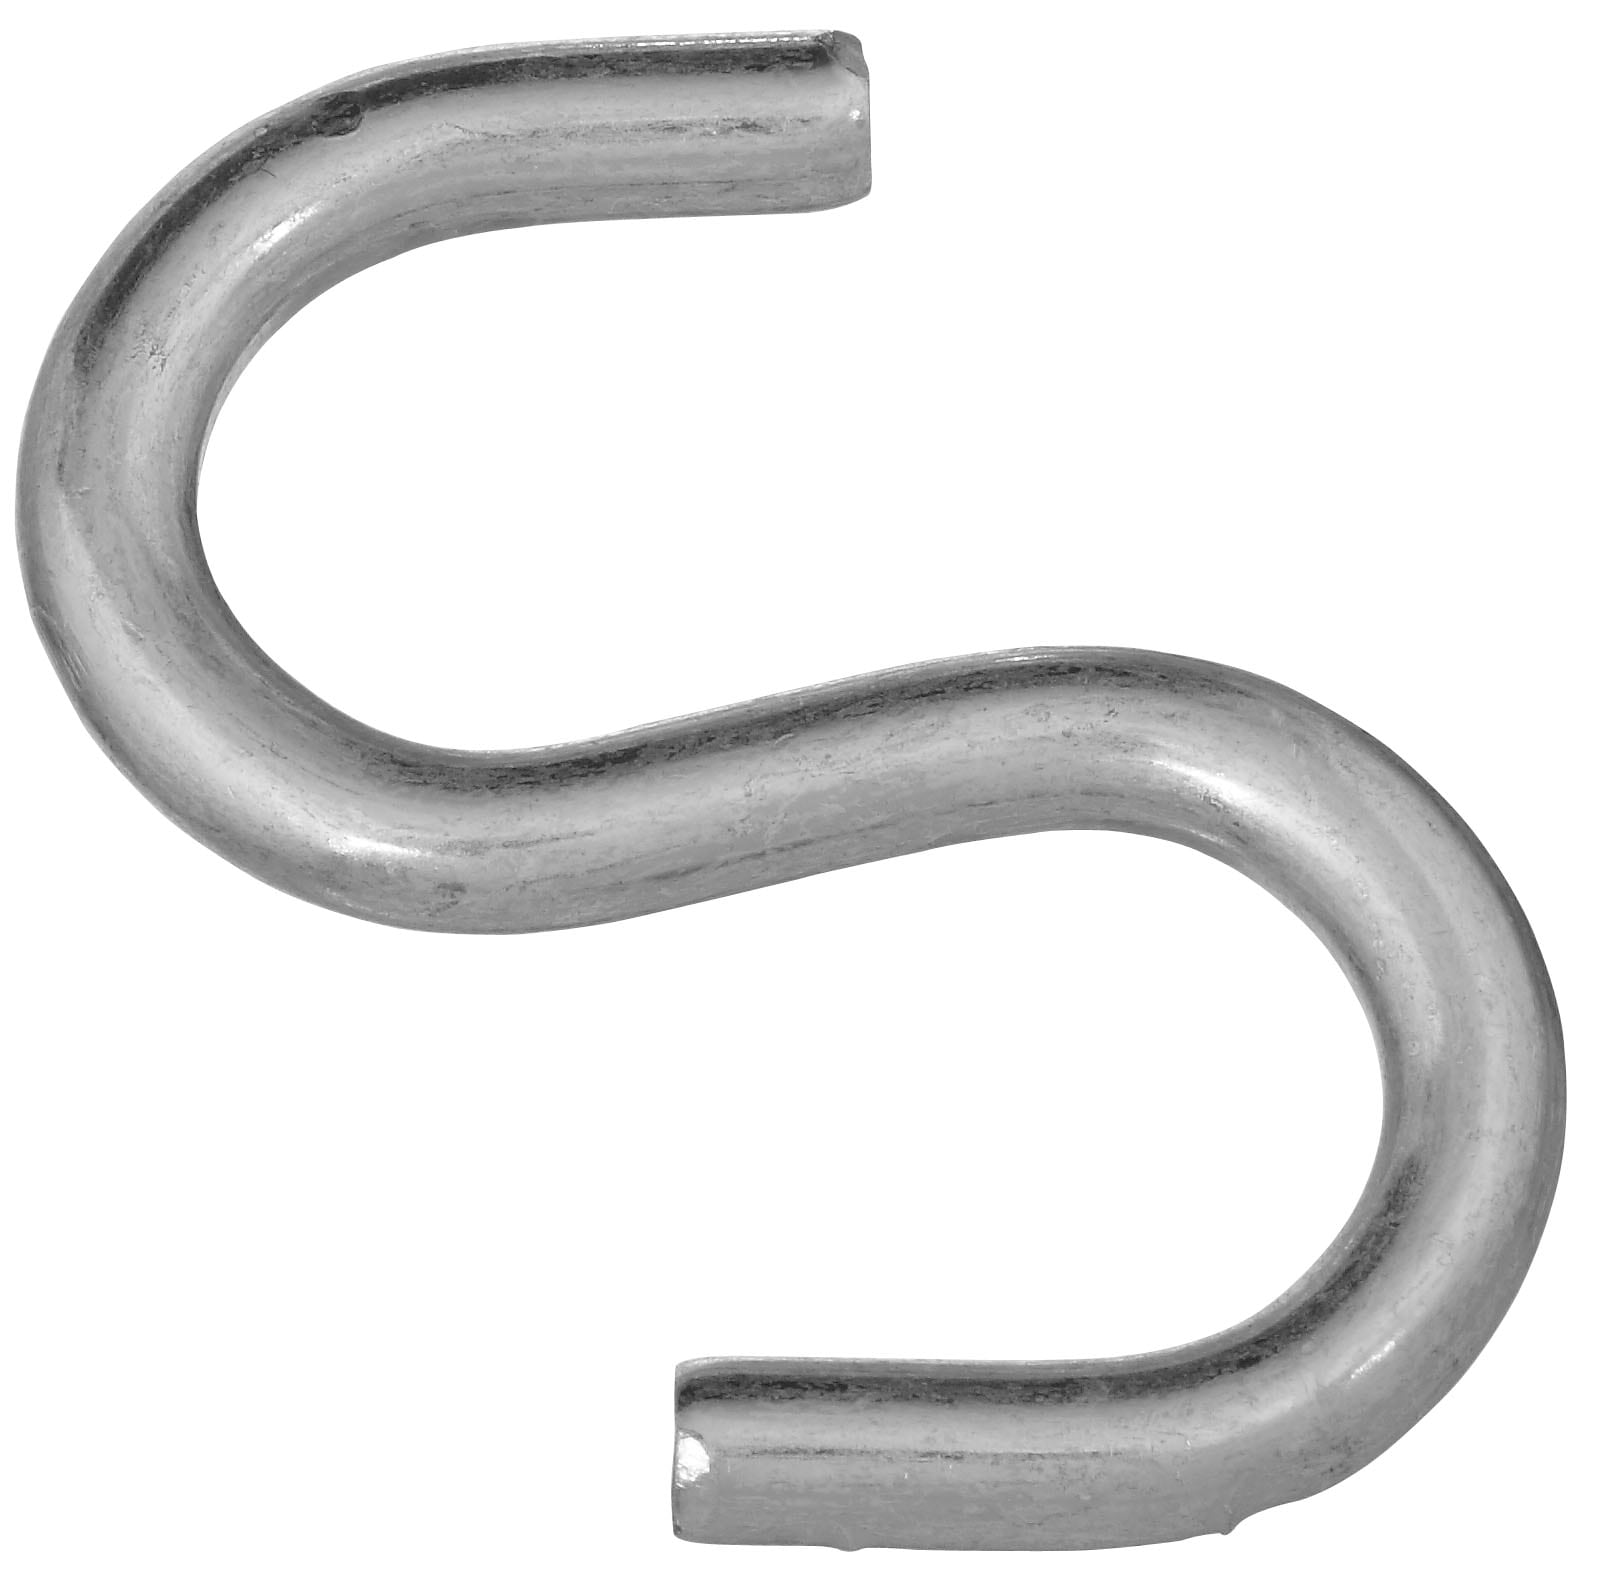 National Hardware 1-in Zinc Plated Zinc S-hook (100-Pack)